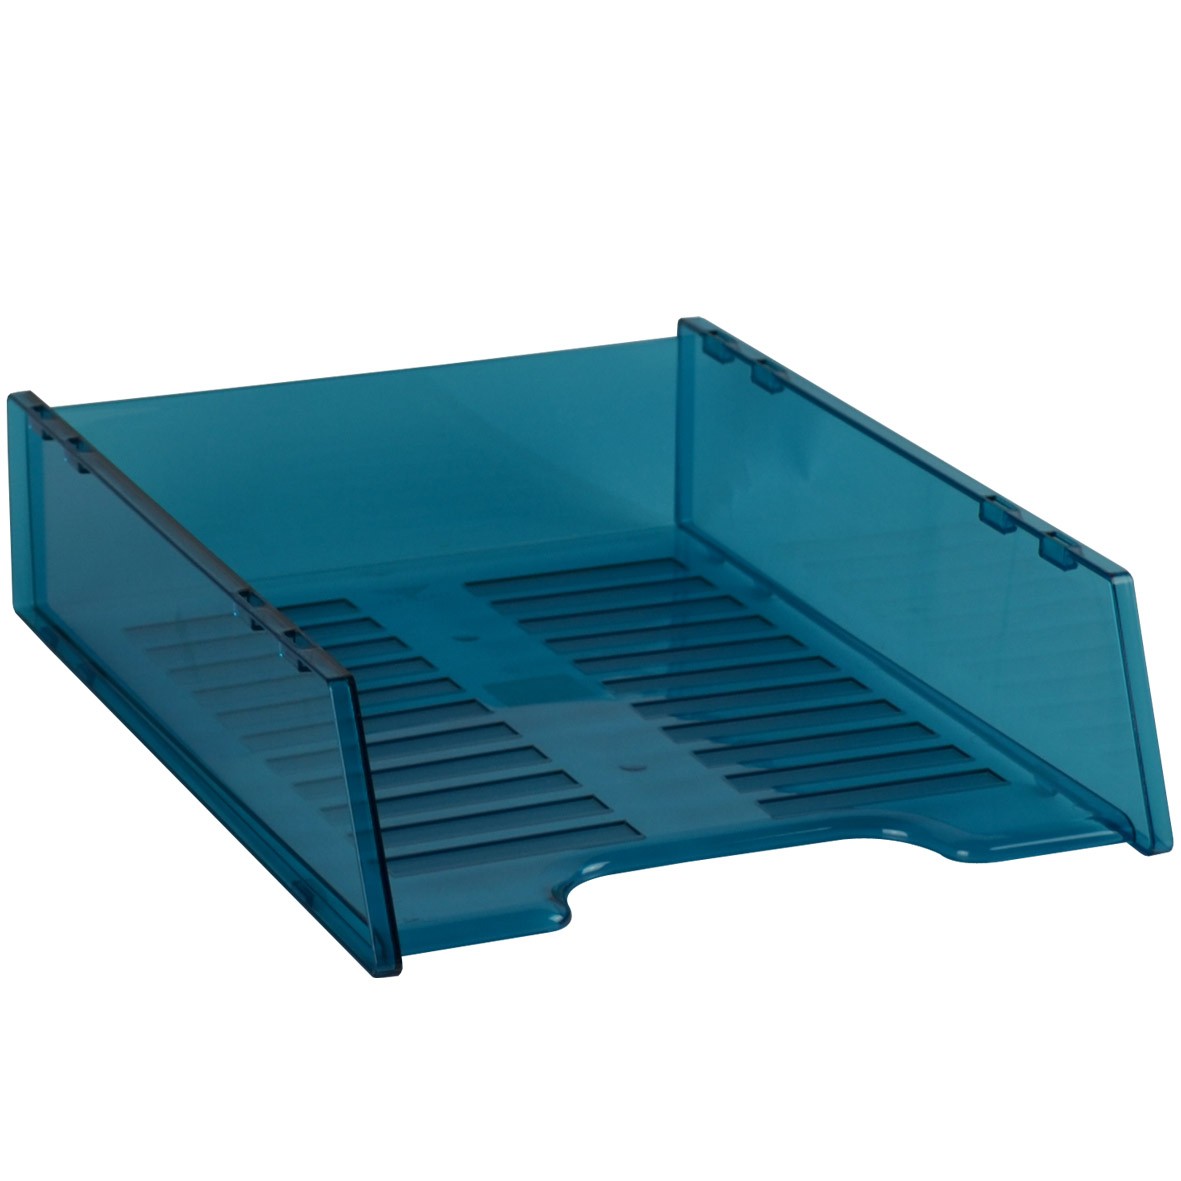 DOCUMENT TRAY STACKABLE TINTED BLUE #I-60TBL  